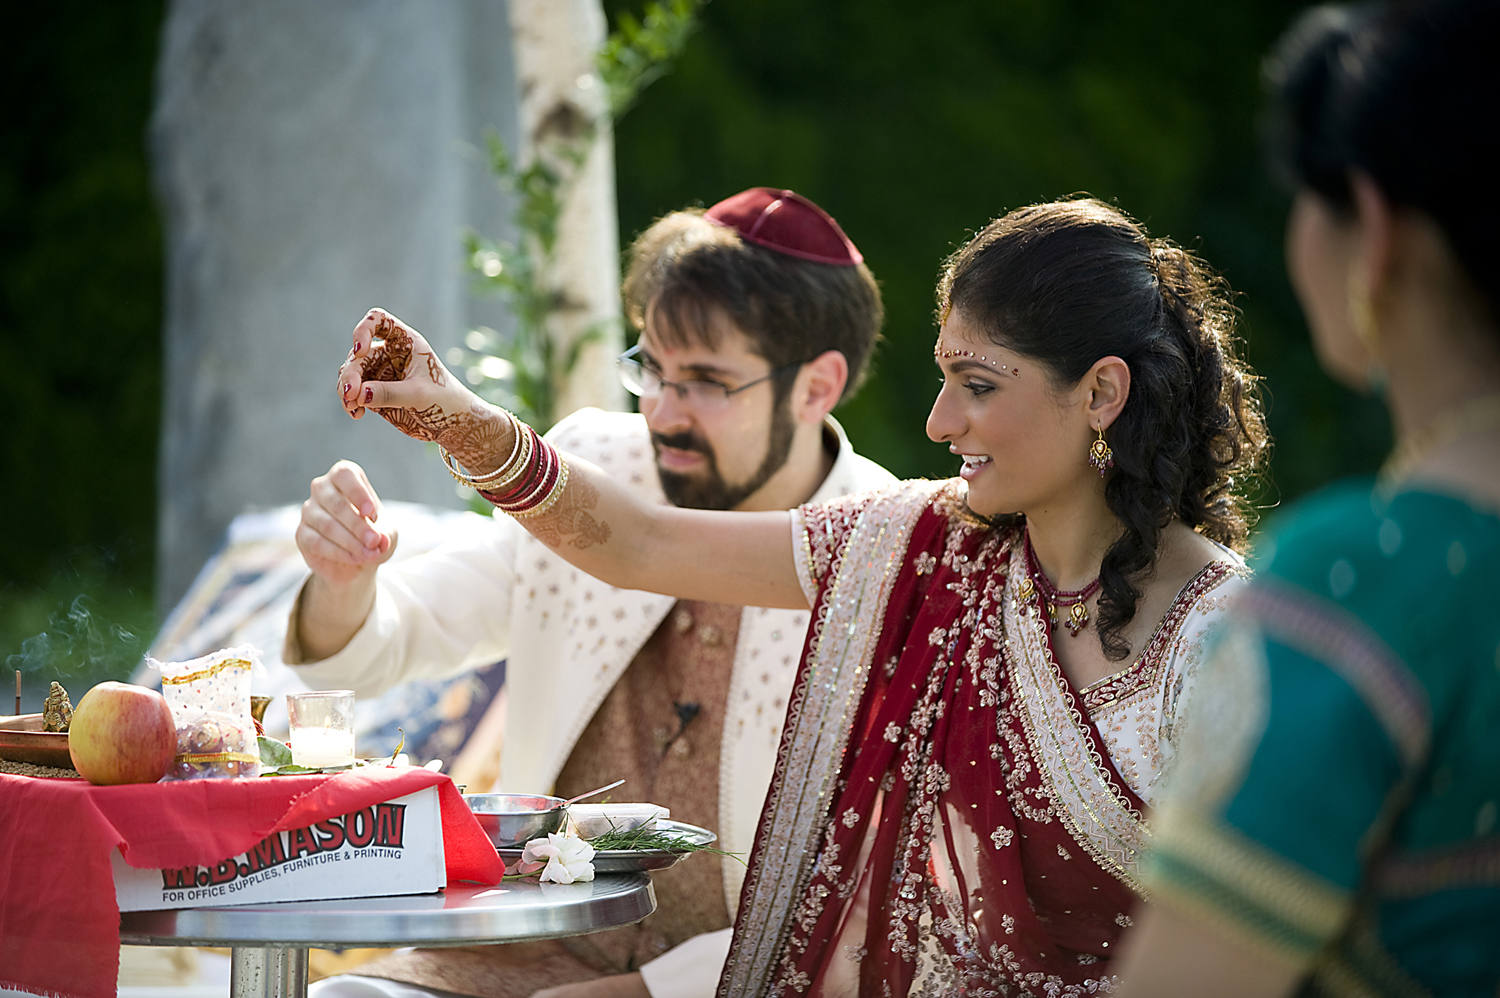 Jewish Hindu wedding ceremony at Grounds for Sculpture